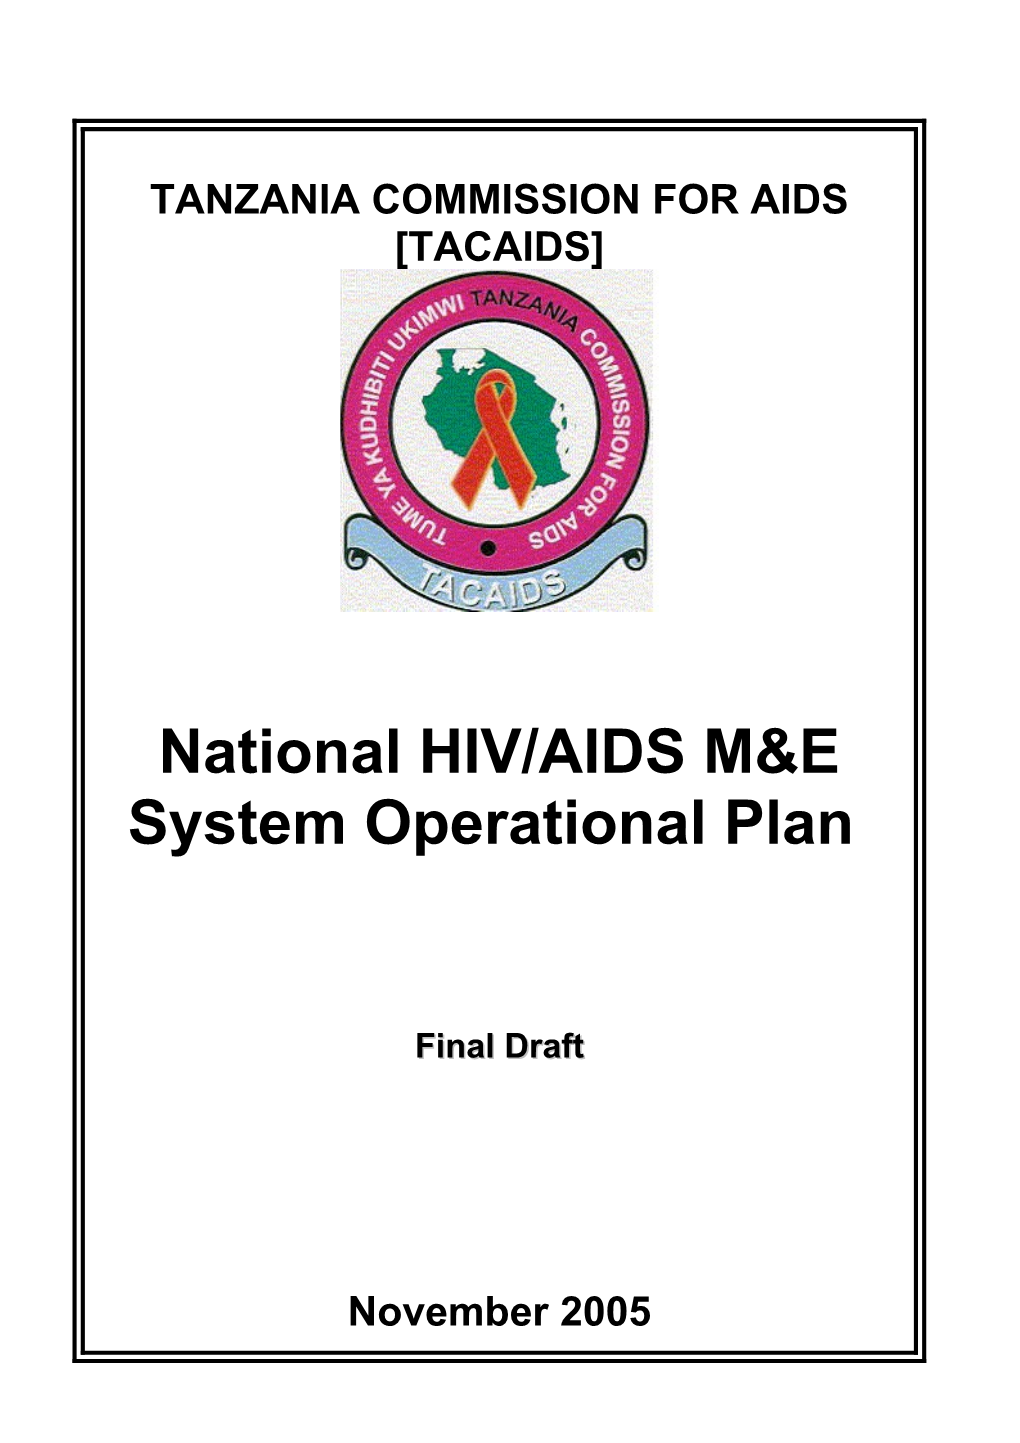 Section 3: Overview of the National M&E System